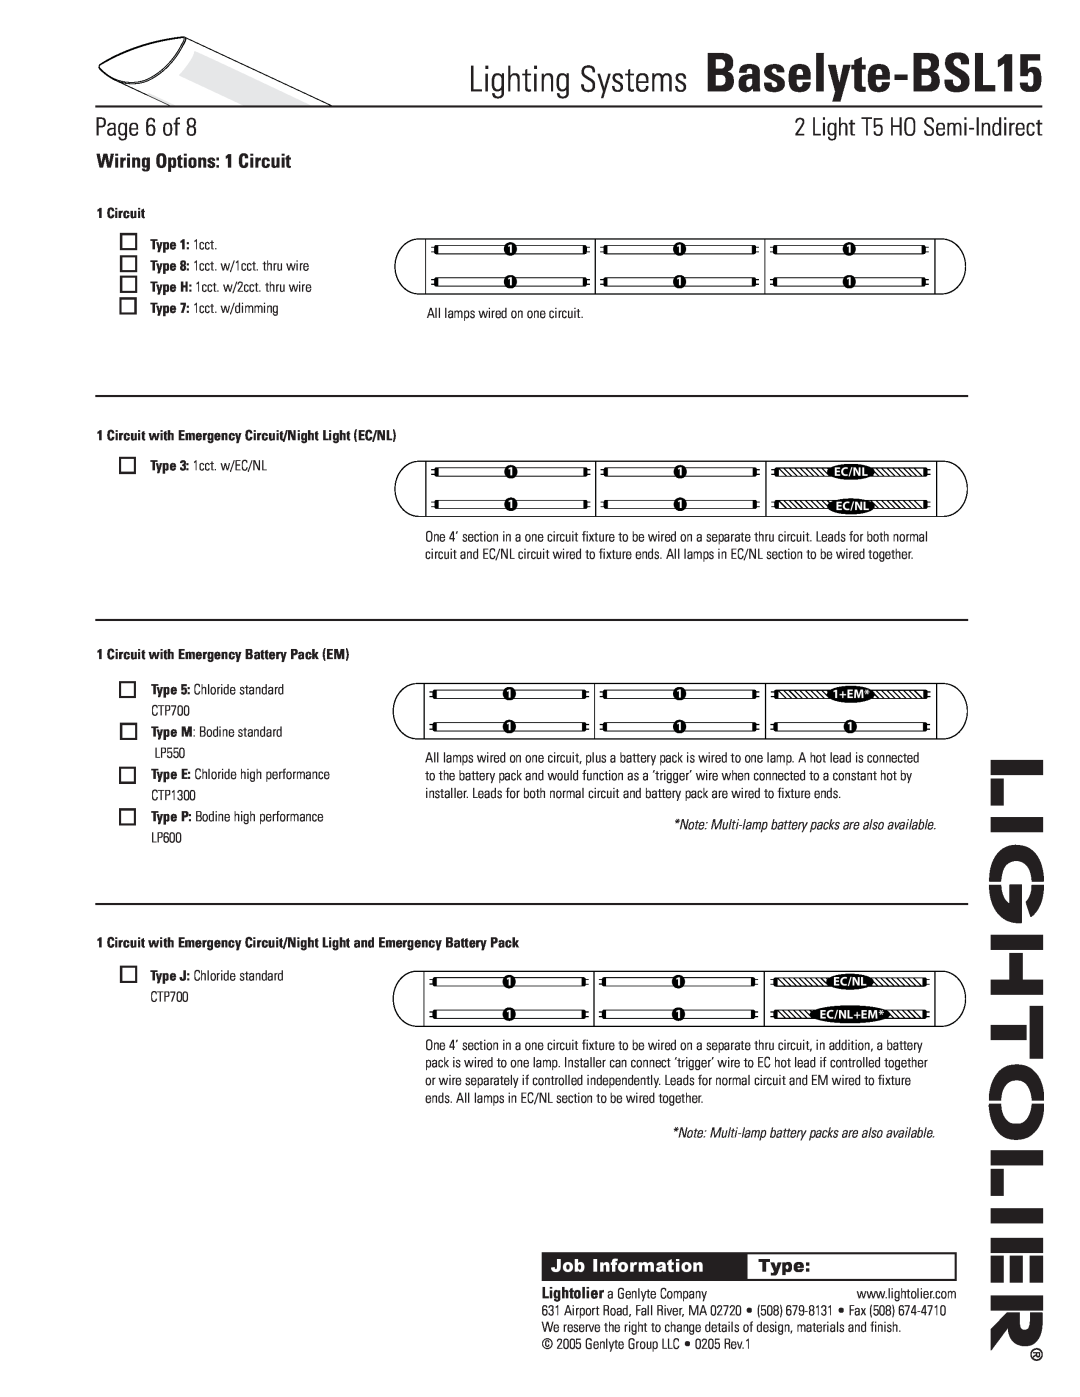 Lightolier Baselyte-BSL15 Wiring Options 1 Circuit, Circuit Type 1 1cct, Circuit with Emergency Battery Pack EM, Page of 